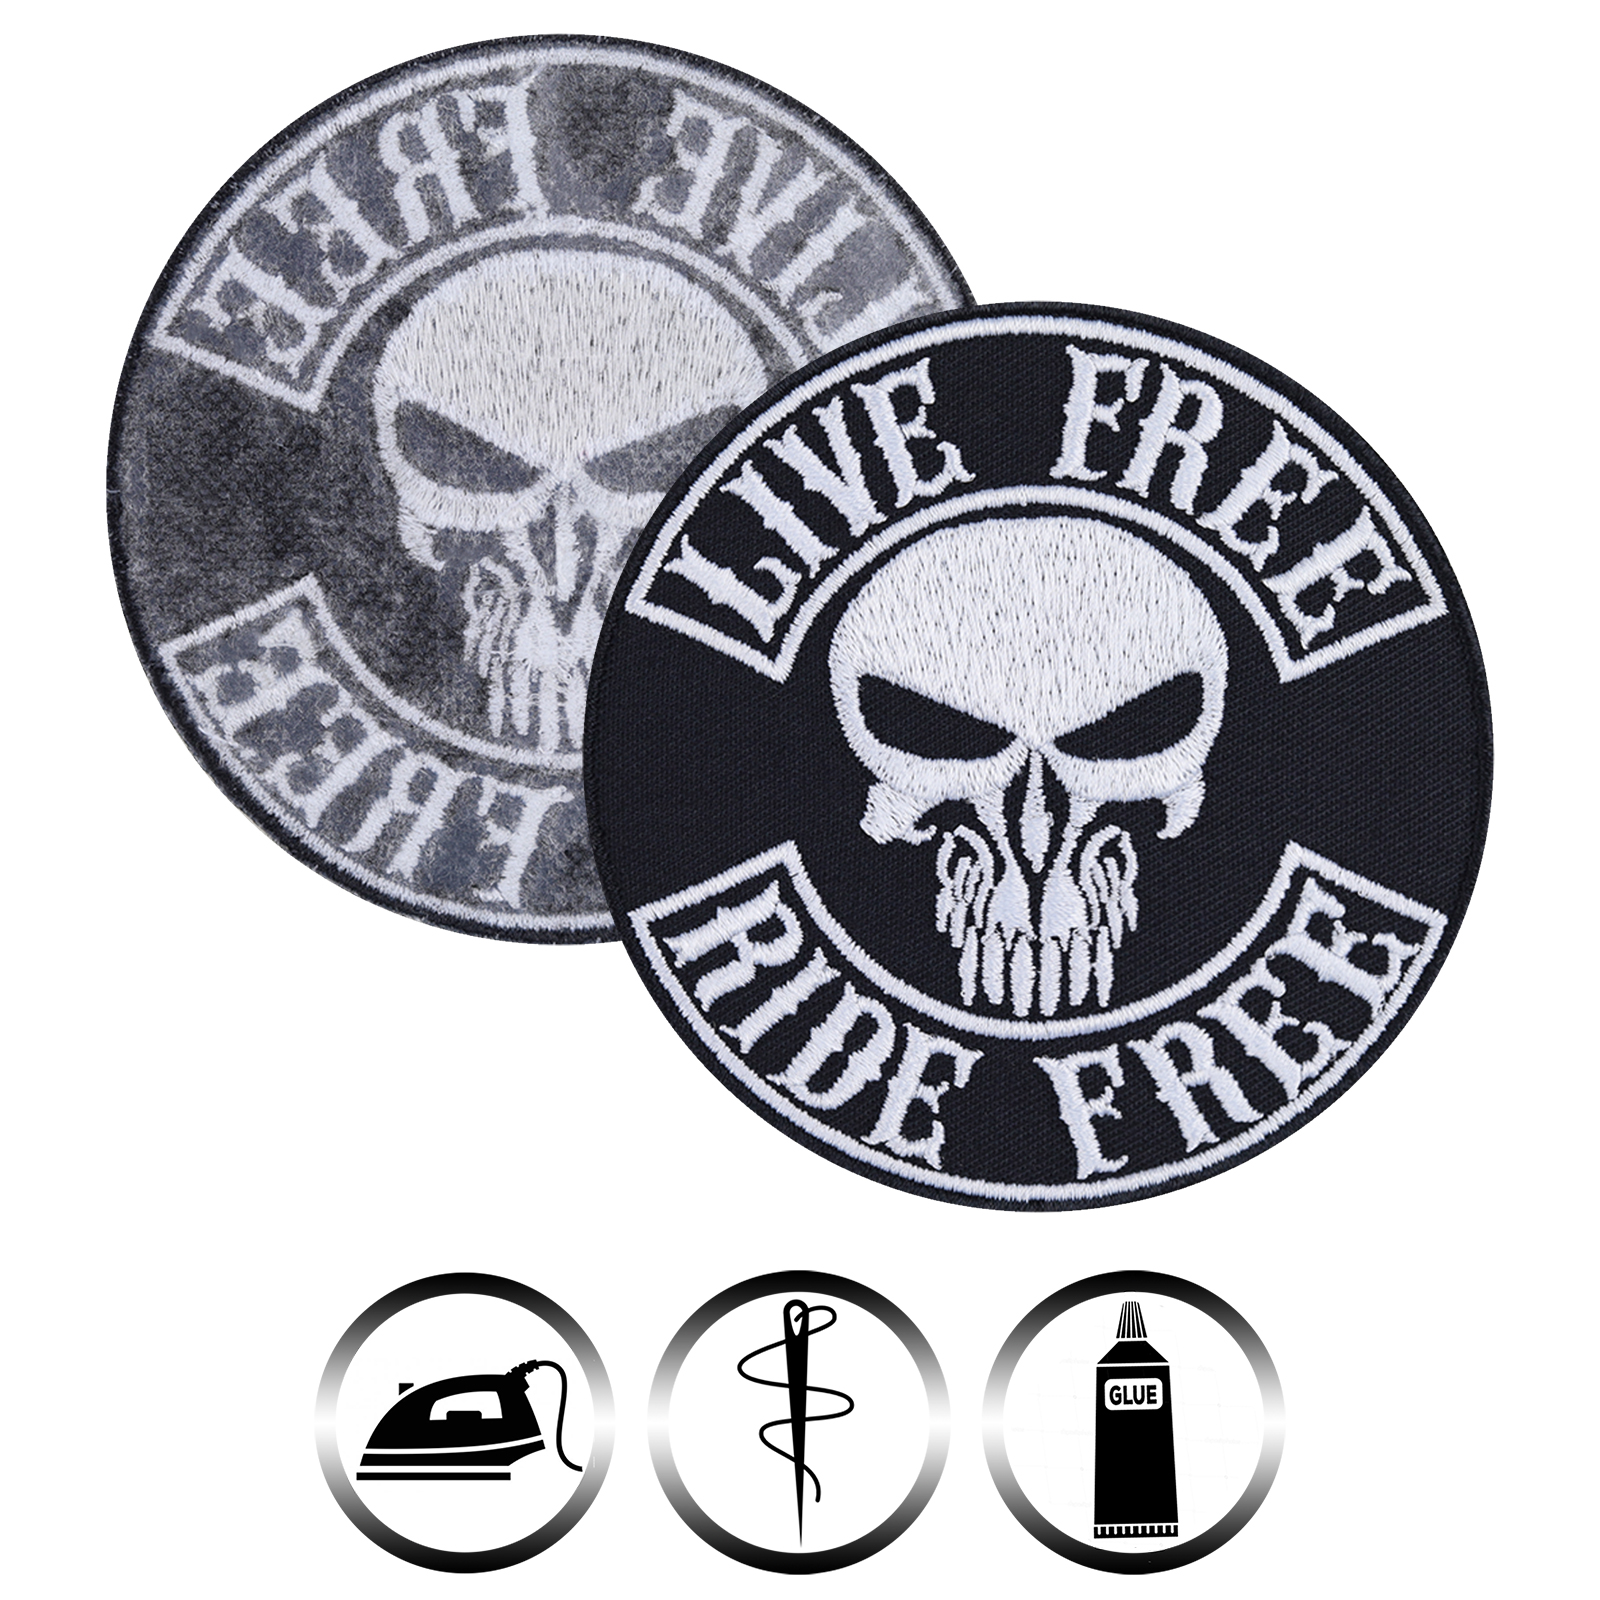 Live free, ride free - Patch